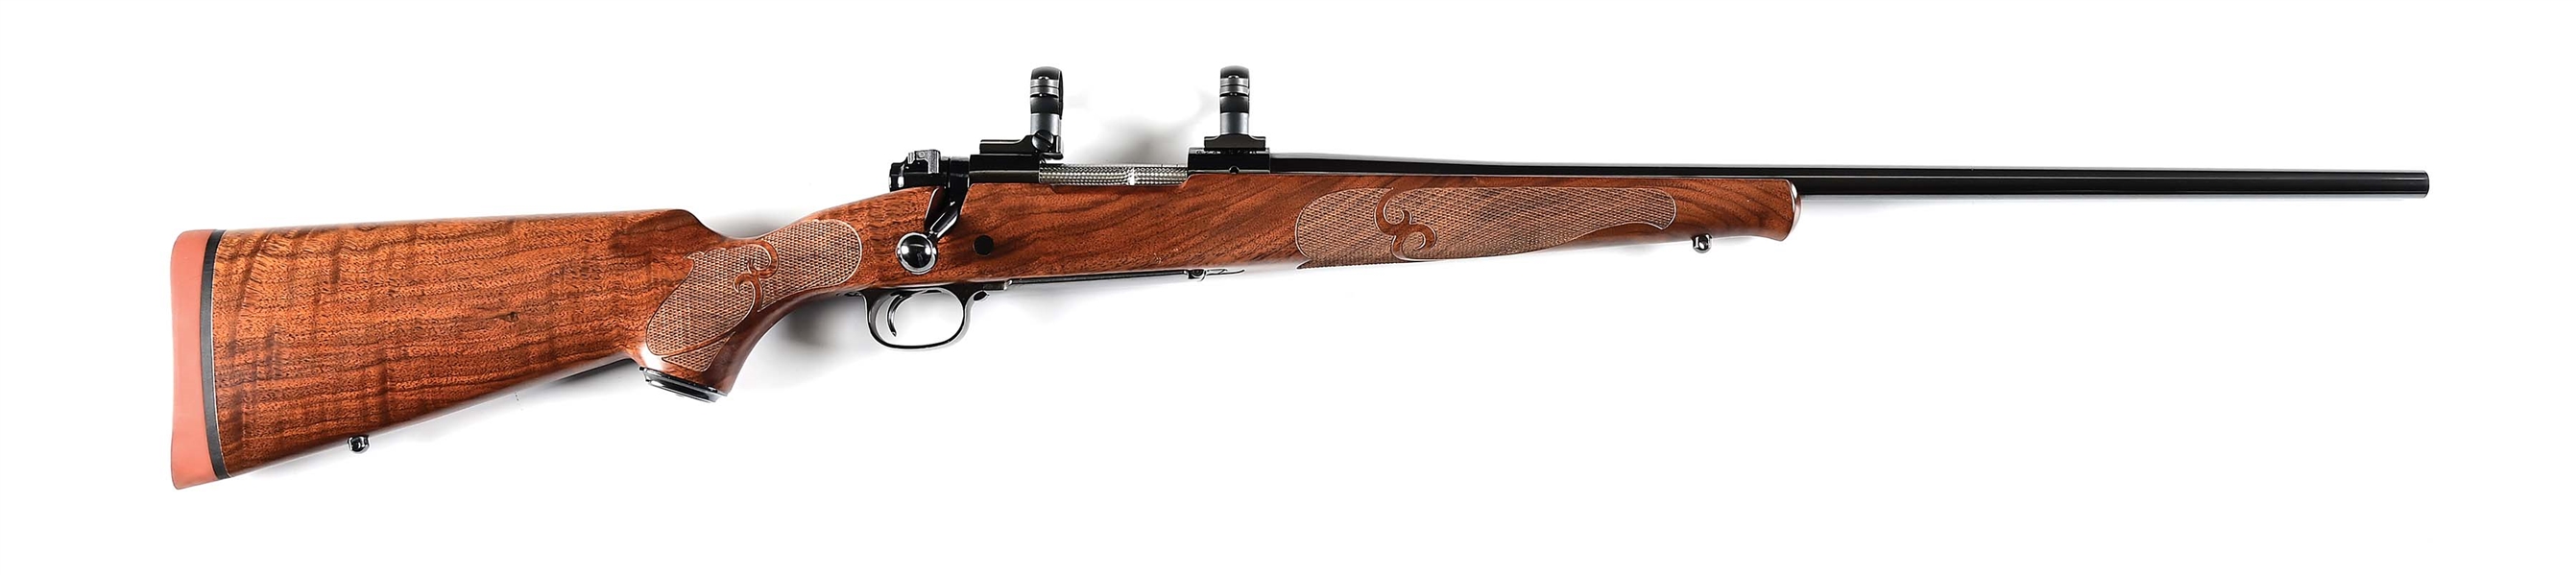 (M) WINCHESTER CUSTOM SHOP MODEL 70 FEATHERWEIGHT BOLT ACTION RIFLE.